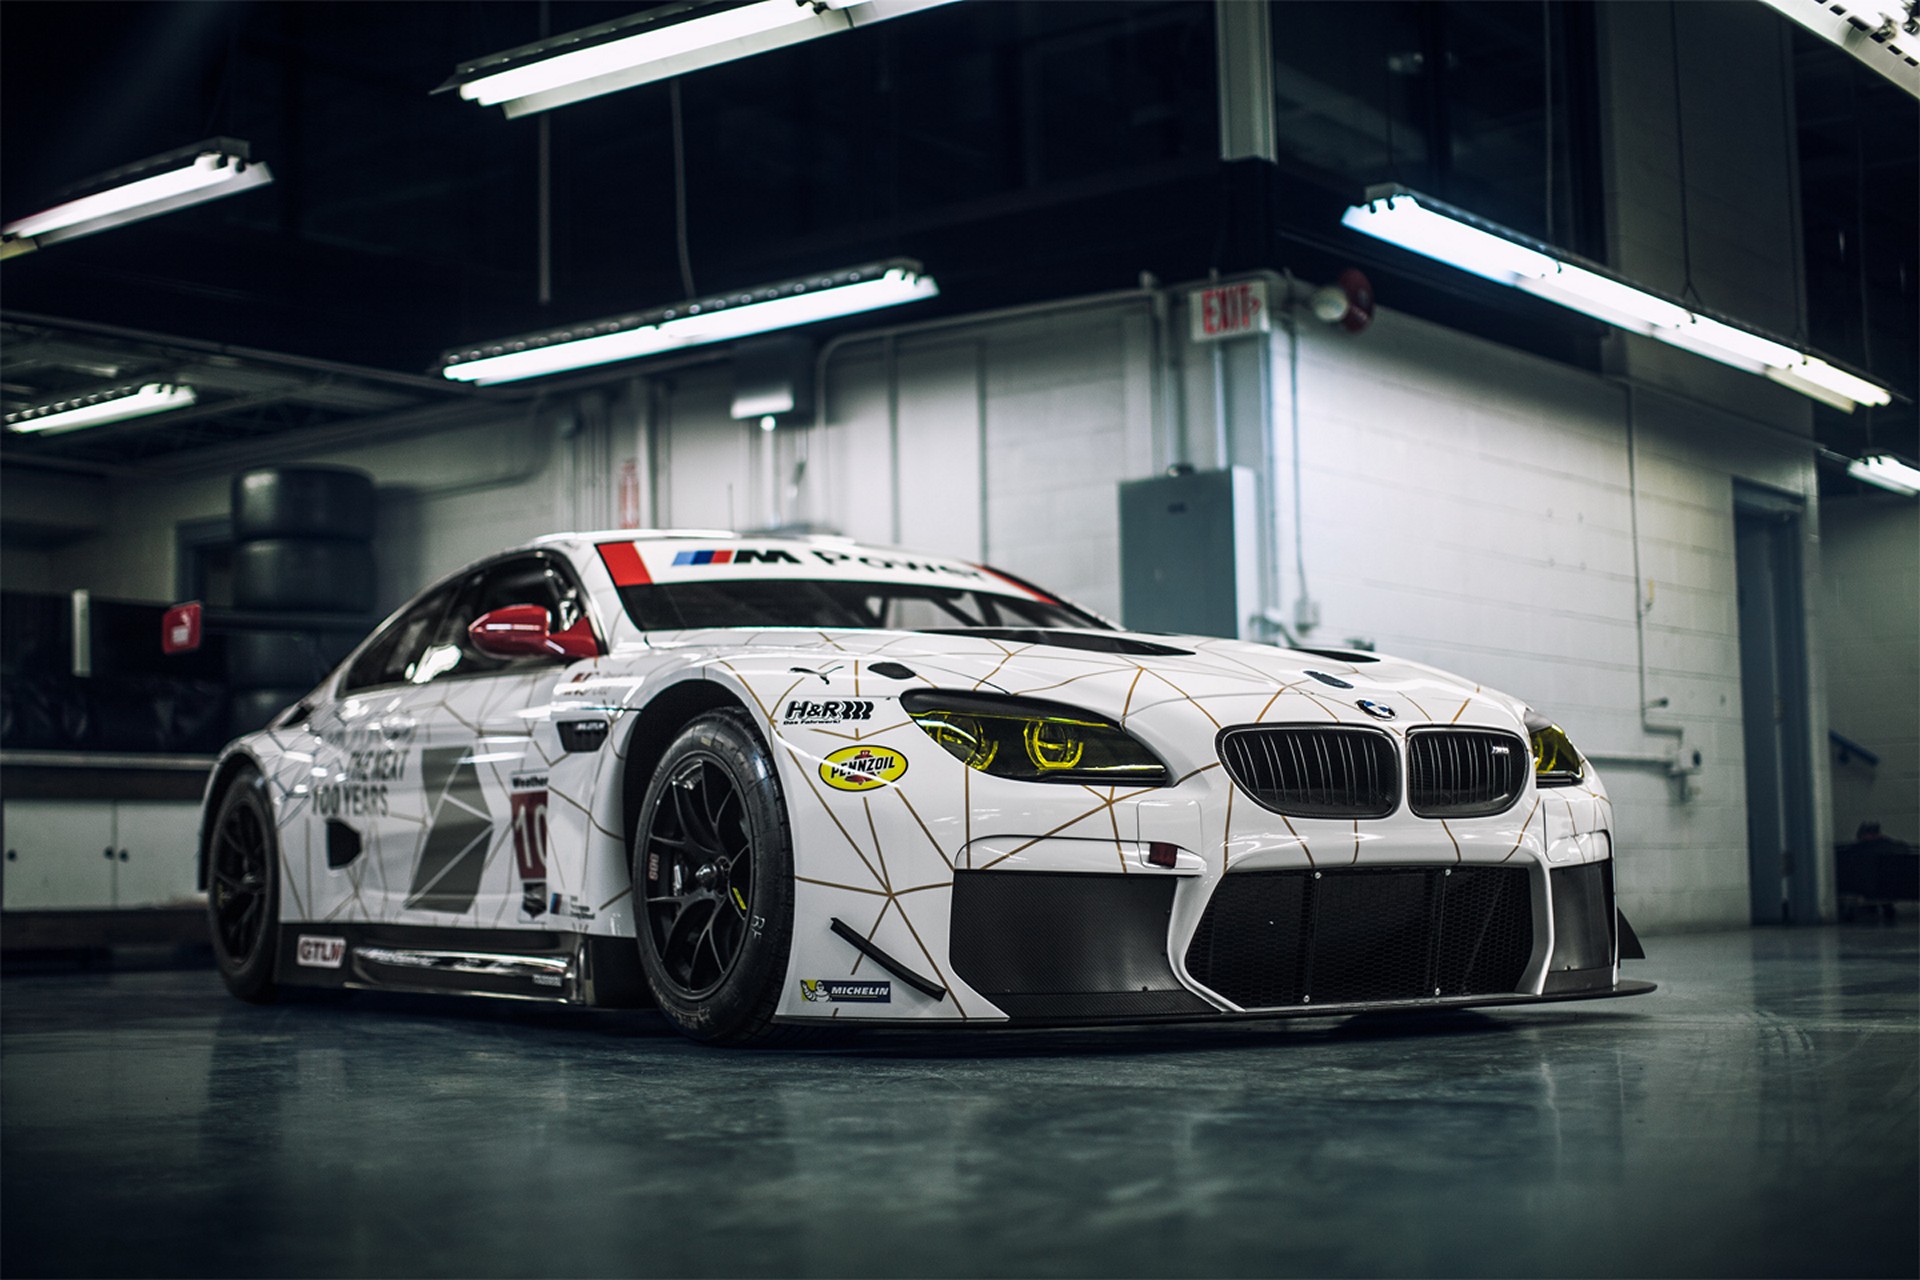 The New BMW Team RLL M6 GTLM prior to the Rolex 24 At Daytona in its special 100th Anniversary commemorative LIVERY © BMW AG